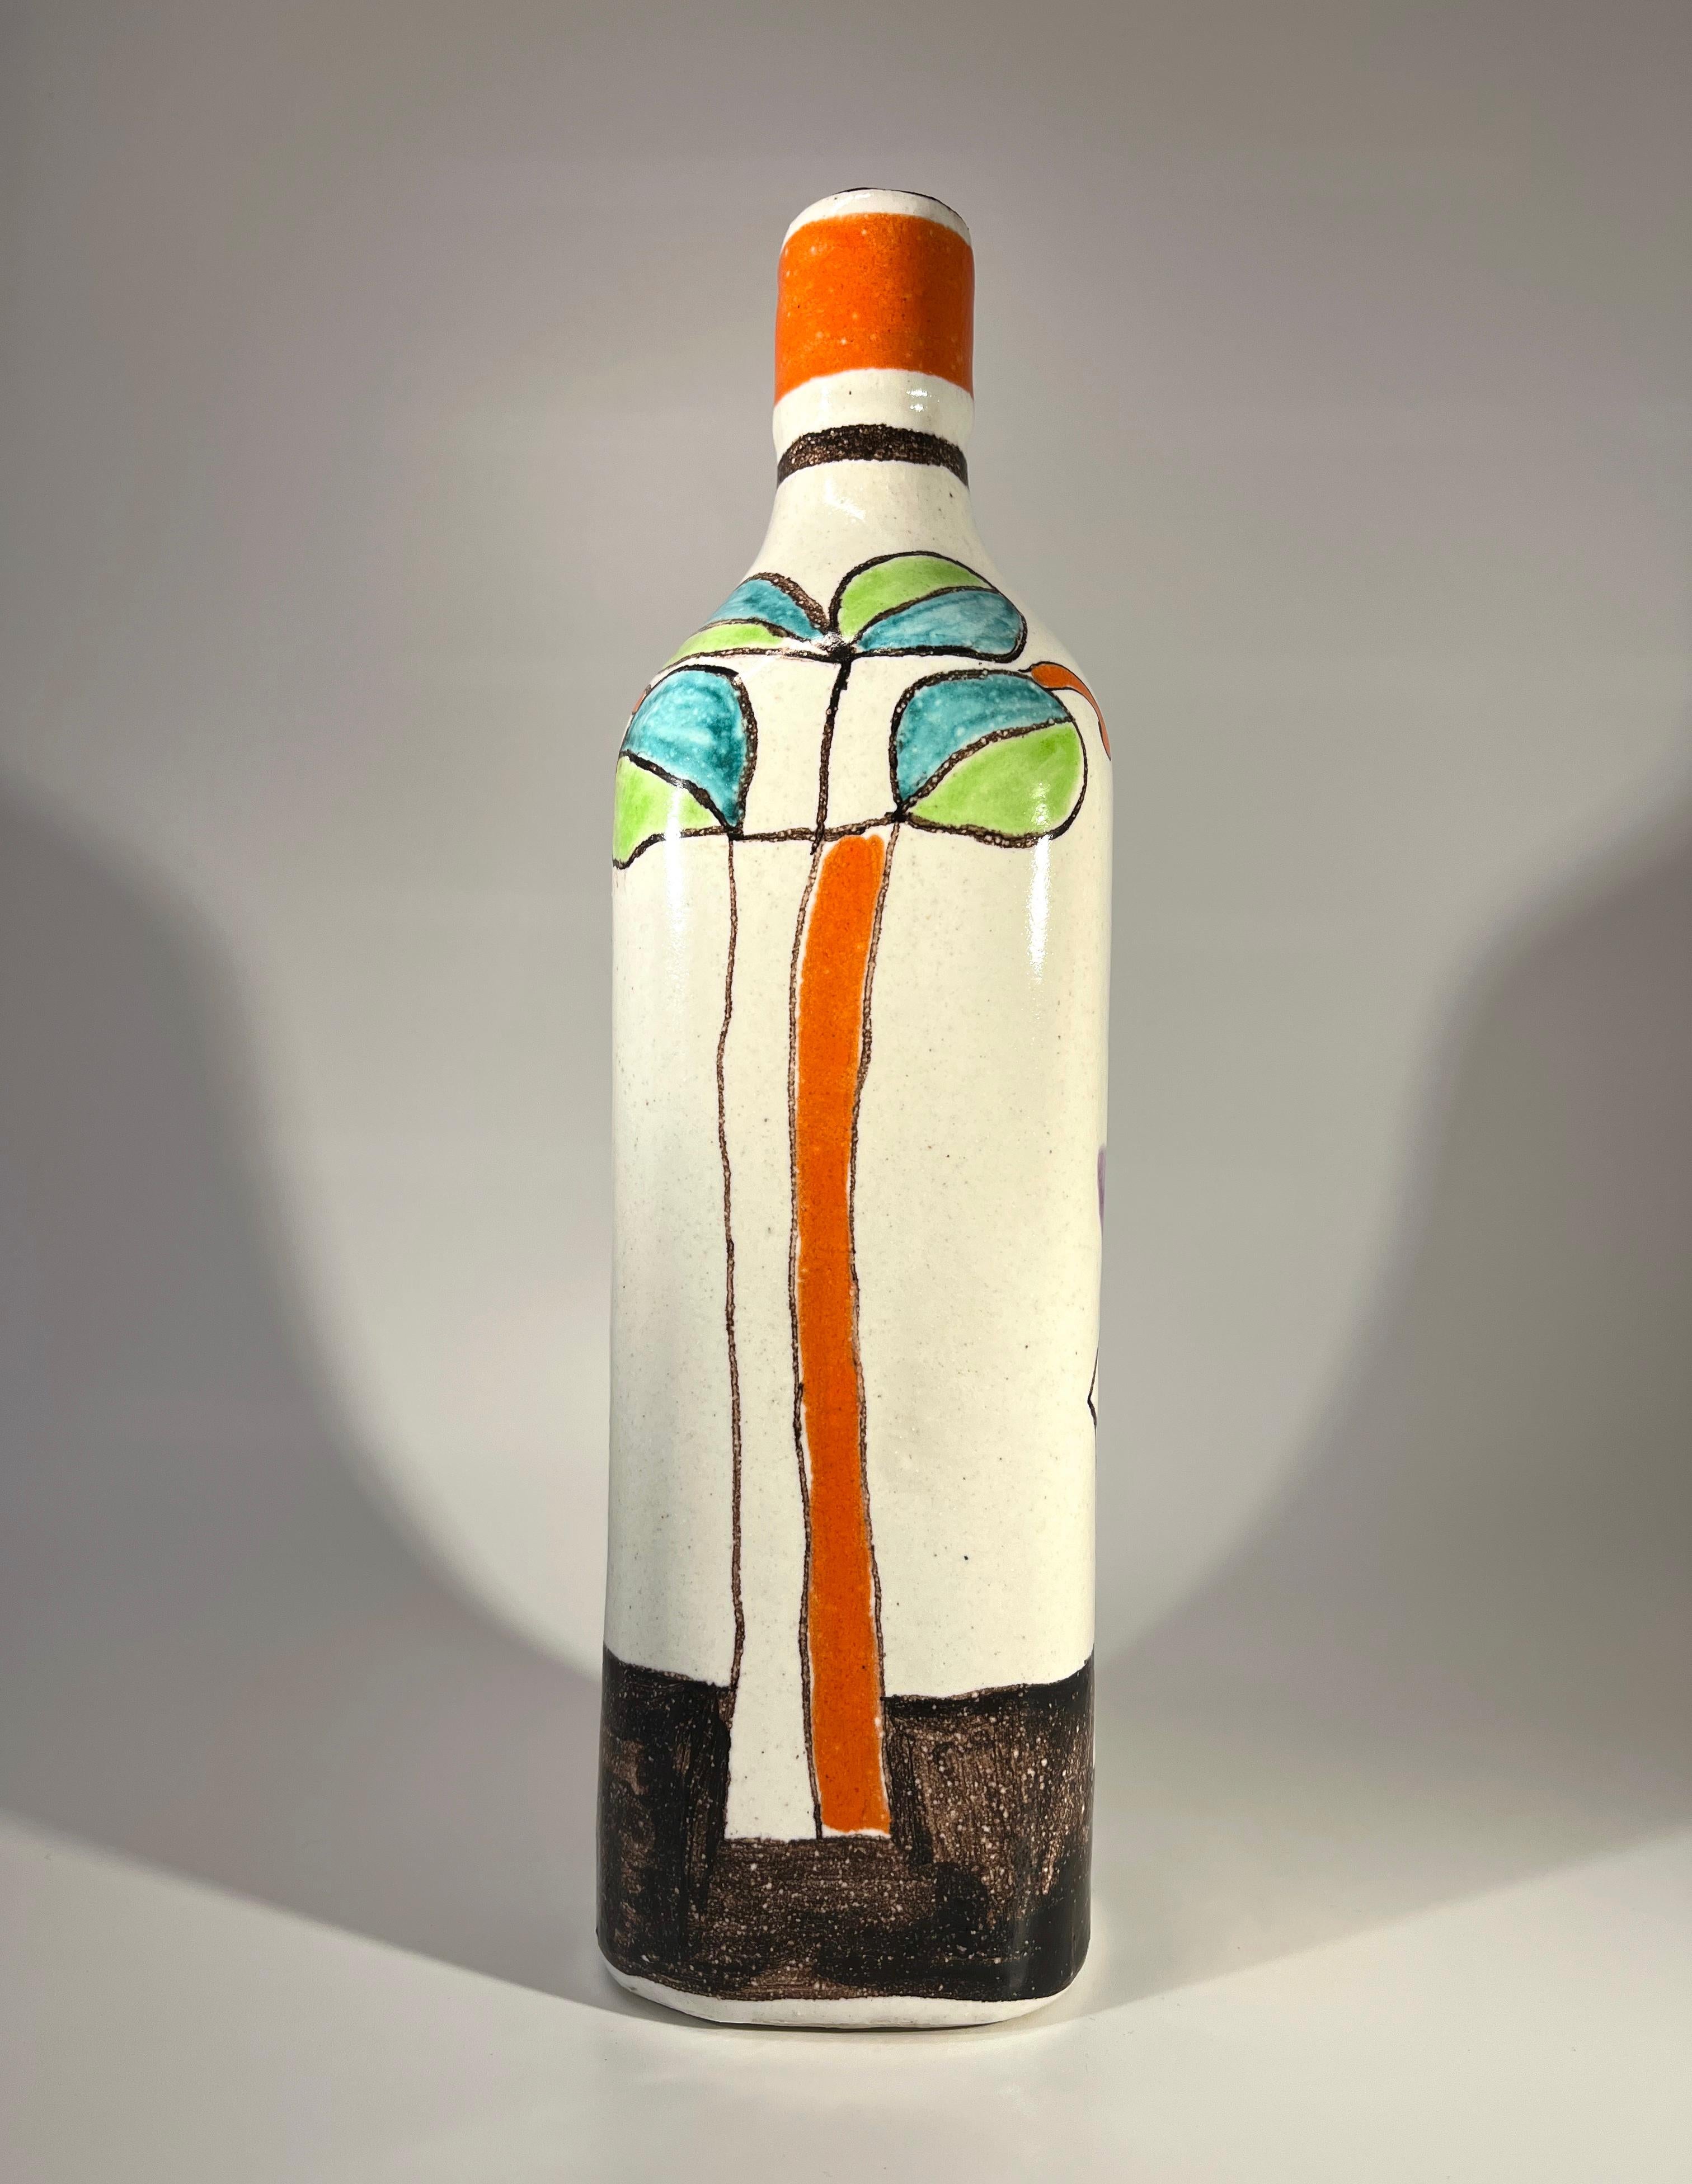 DeSimone 'Arms Outstretched' Hand Painted Italian Ceramic Bottle Vase c1960's In Good Condition For Sale In Rothley, Leicestershire